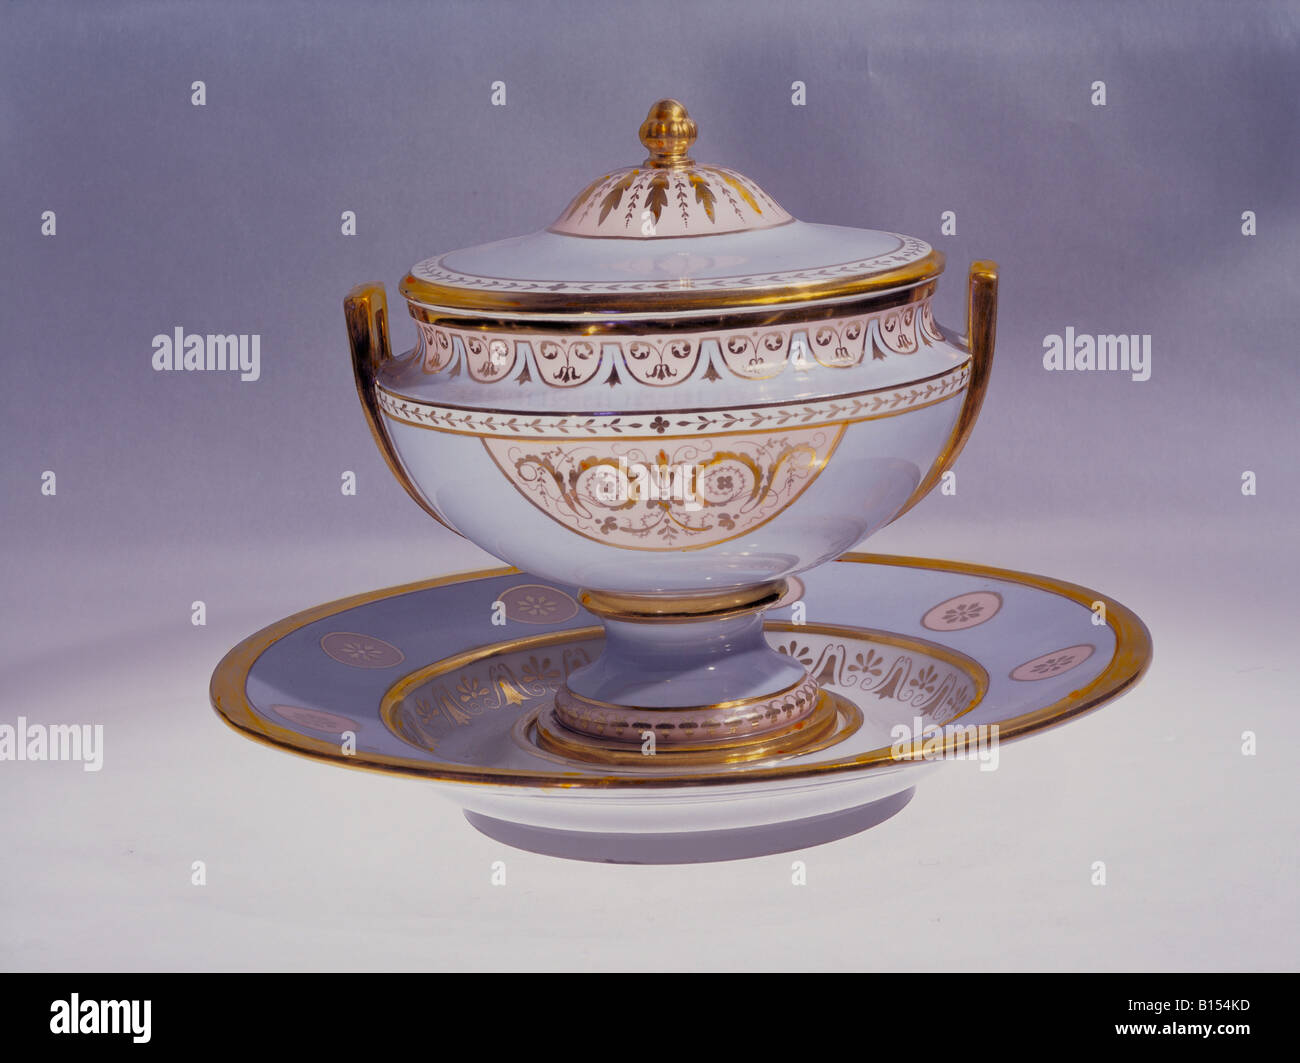 fine arts, porcelain, tureen, height 19 cm, plate, diameter 23 cm, Empire decor, Nymphenburg Porcelain Manufactory, Germany, circa 1820, Munich Residence, porcelain collection, Artist's Copyright has not to be cleared Stock Photo